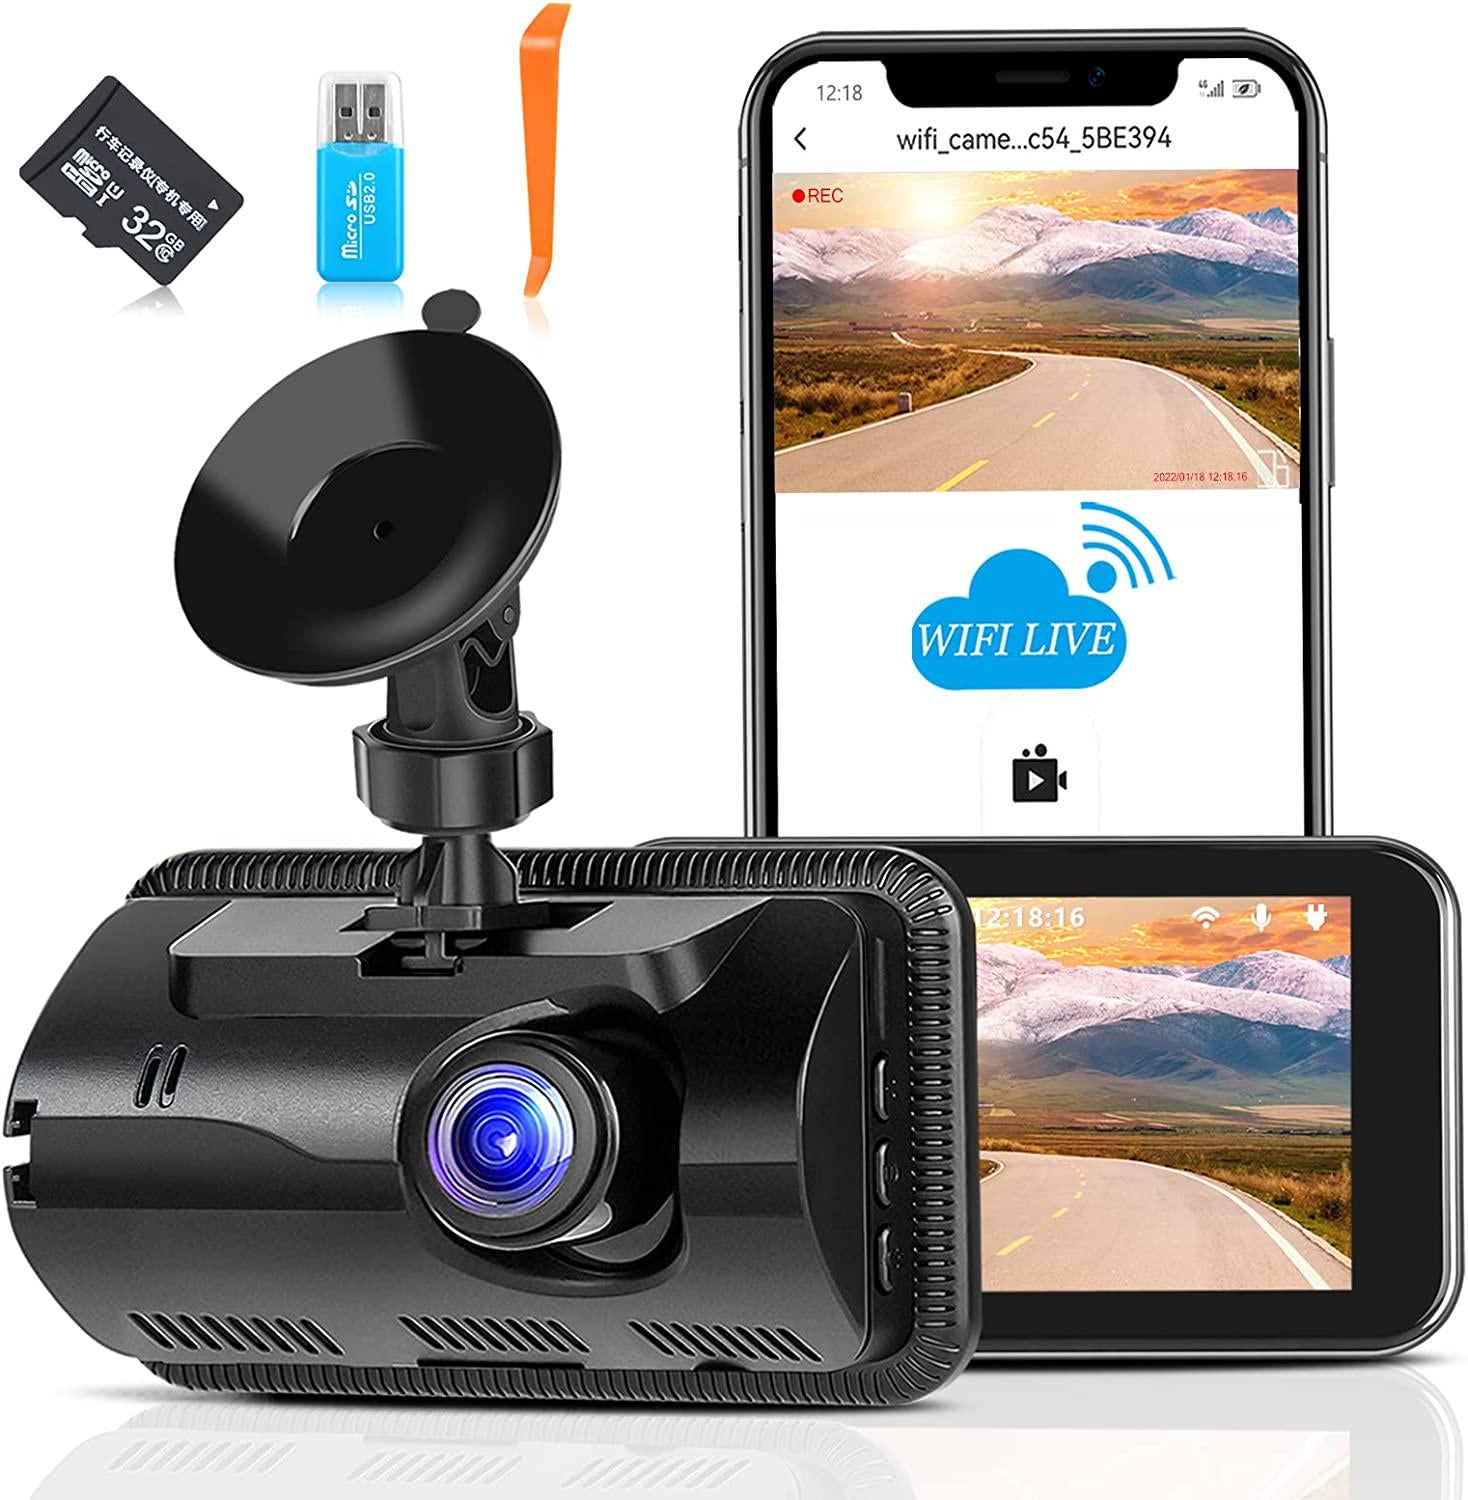 LINGTHIN, LINGTHIN Dash Cam WiFi&APP Control Full HD 1080P Dashcam with 32G Card, Dash Cam front Wireless Dash Cams for Cars with 3.5 Inch IFS Screen, Loop Recording,Super Night Vision,G-sensor,Parking Monitor